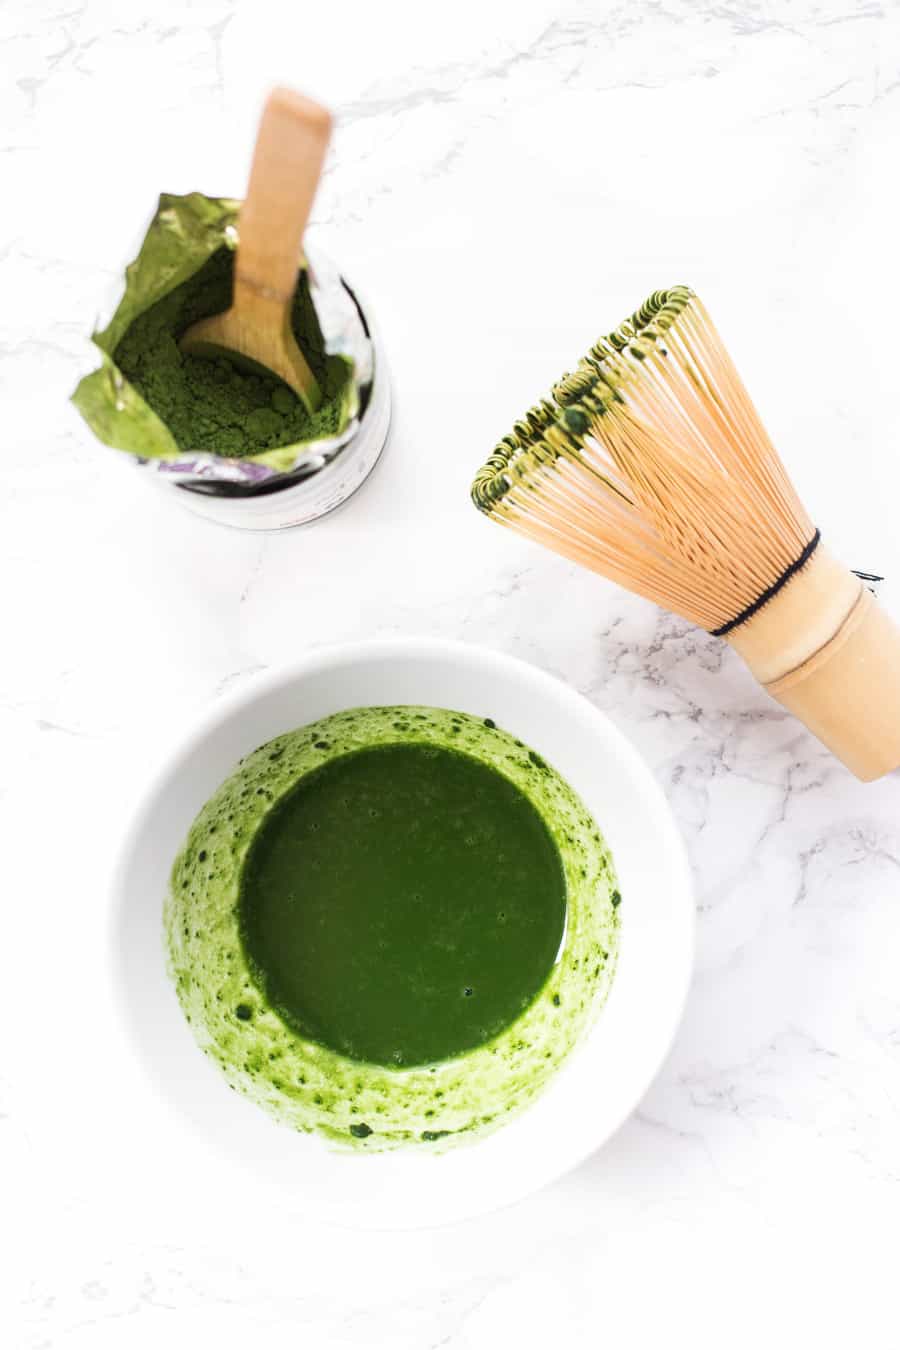 Creamy ICED MATCHA LATTE made with medicinal mushroom for healing & energy!